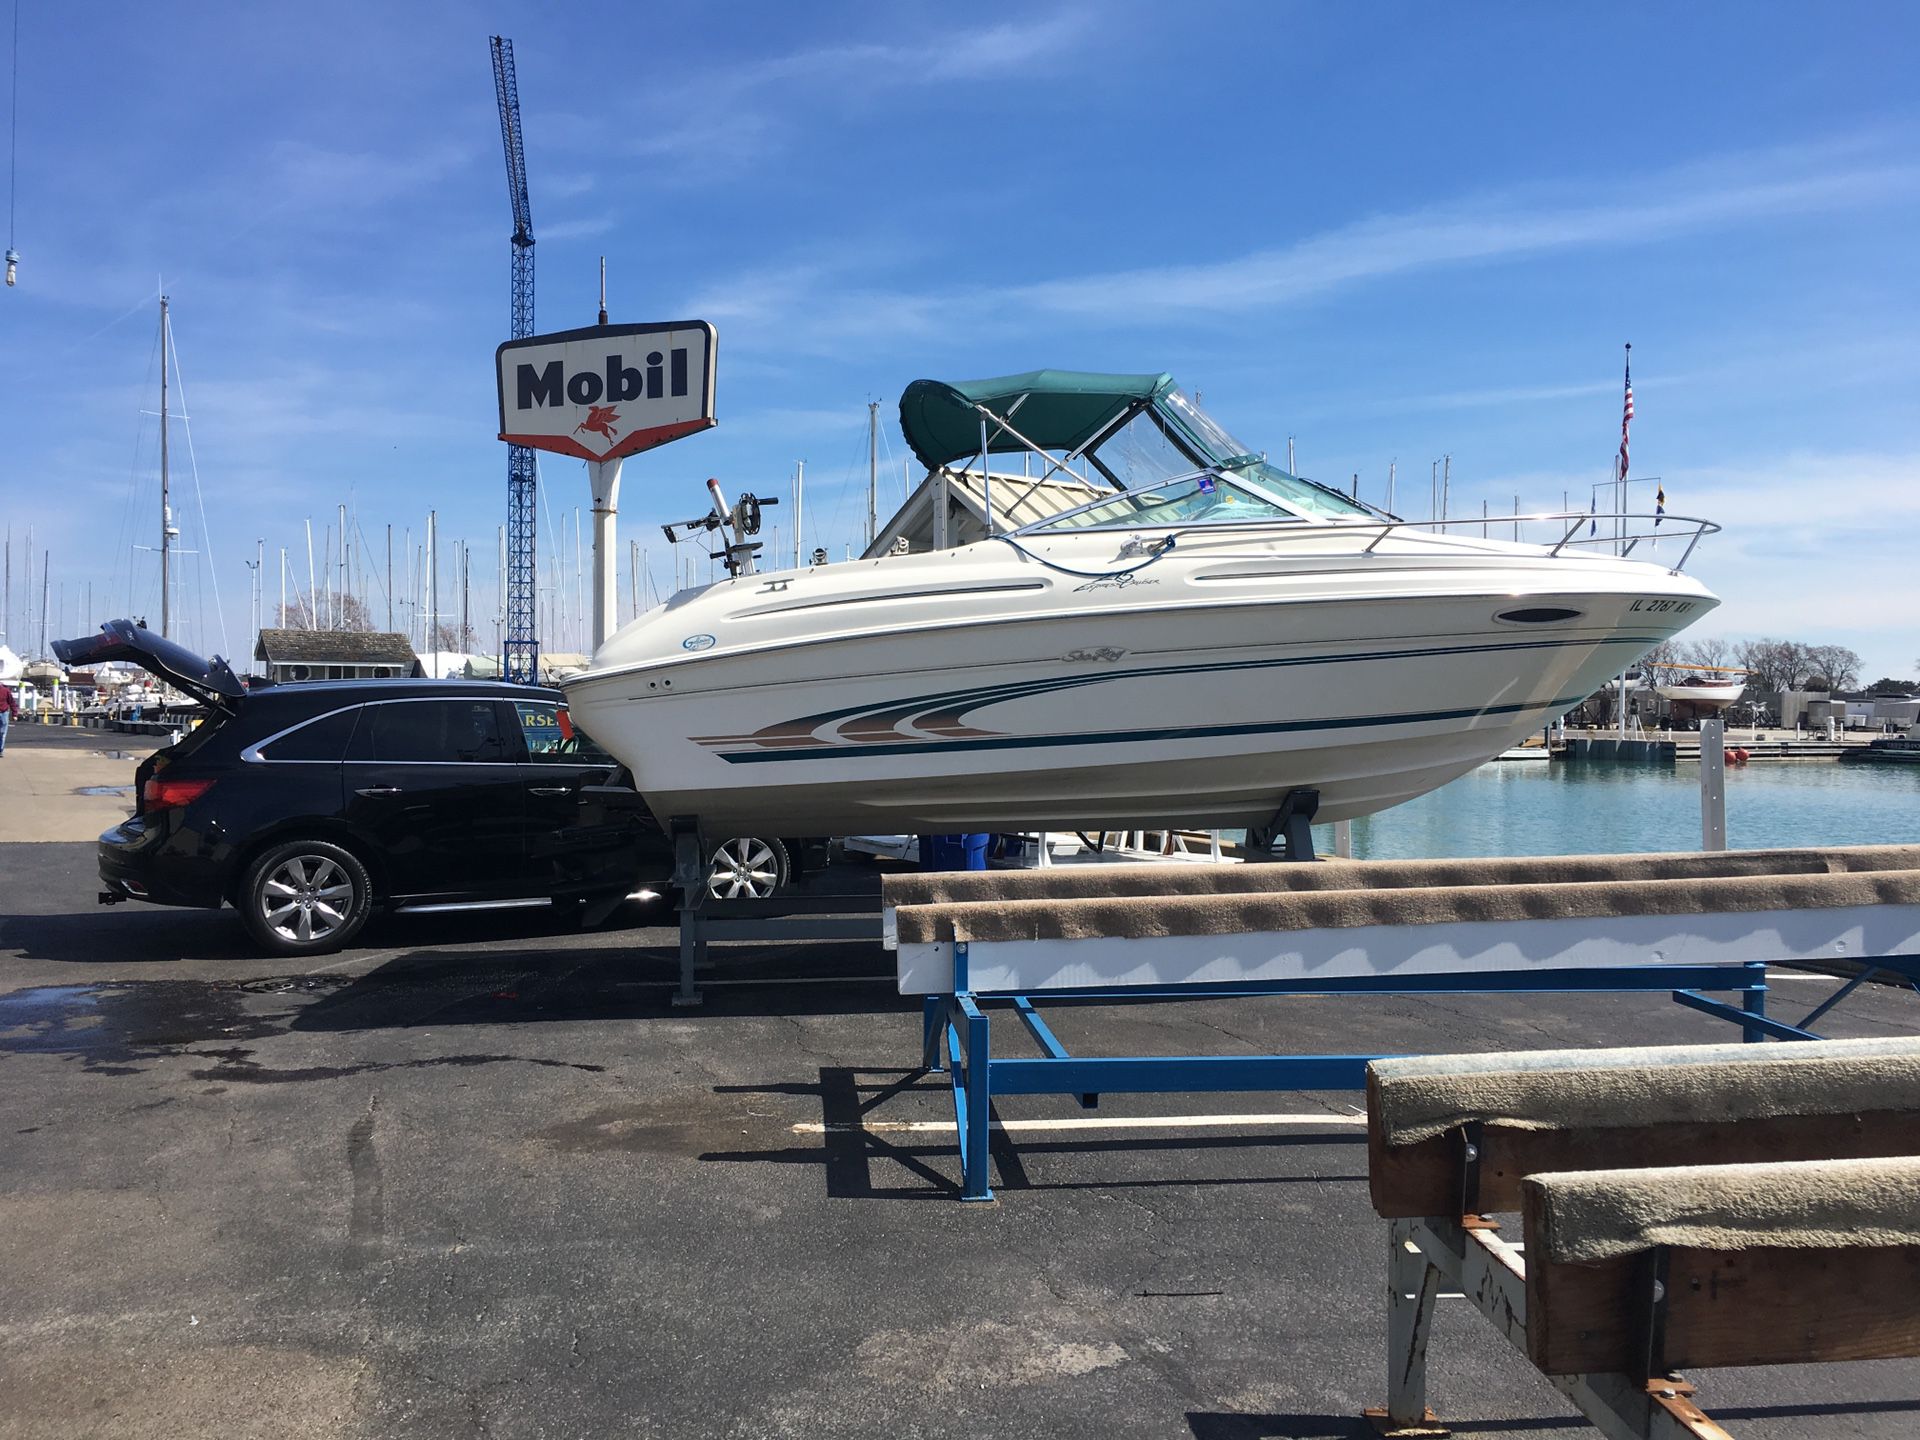 Boat for sale- Sea ray 215 express cruiser